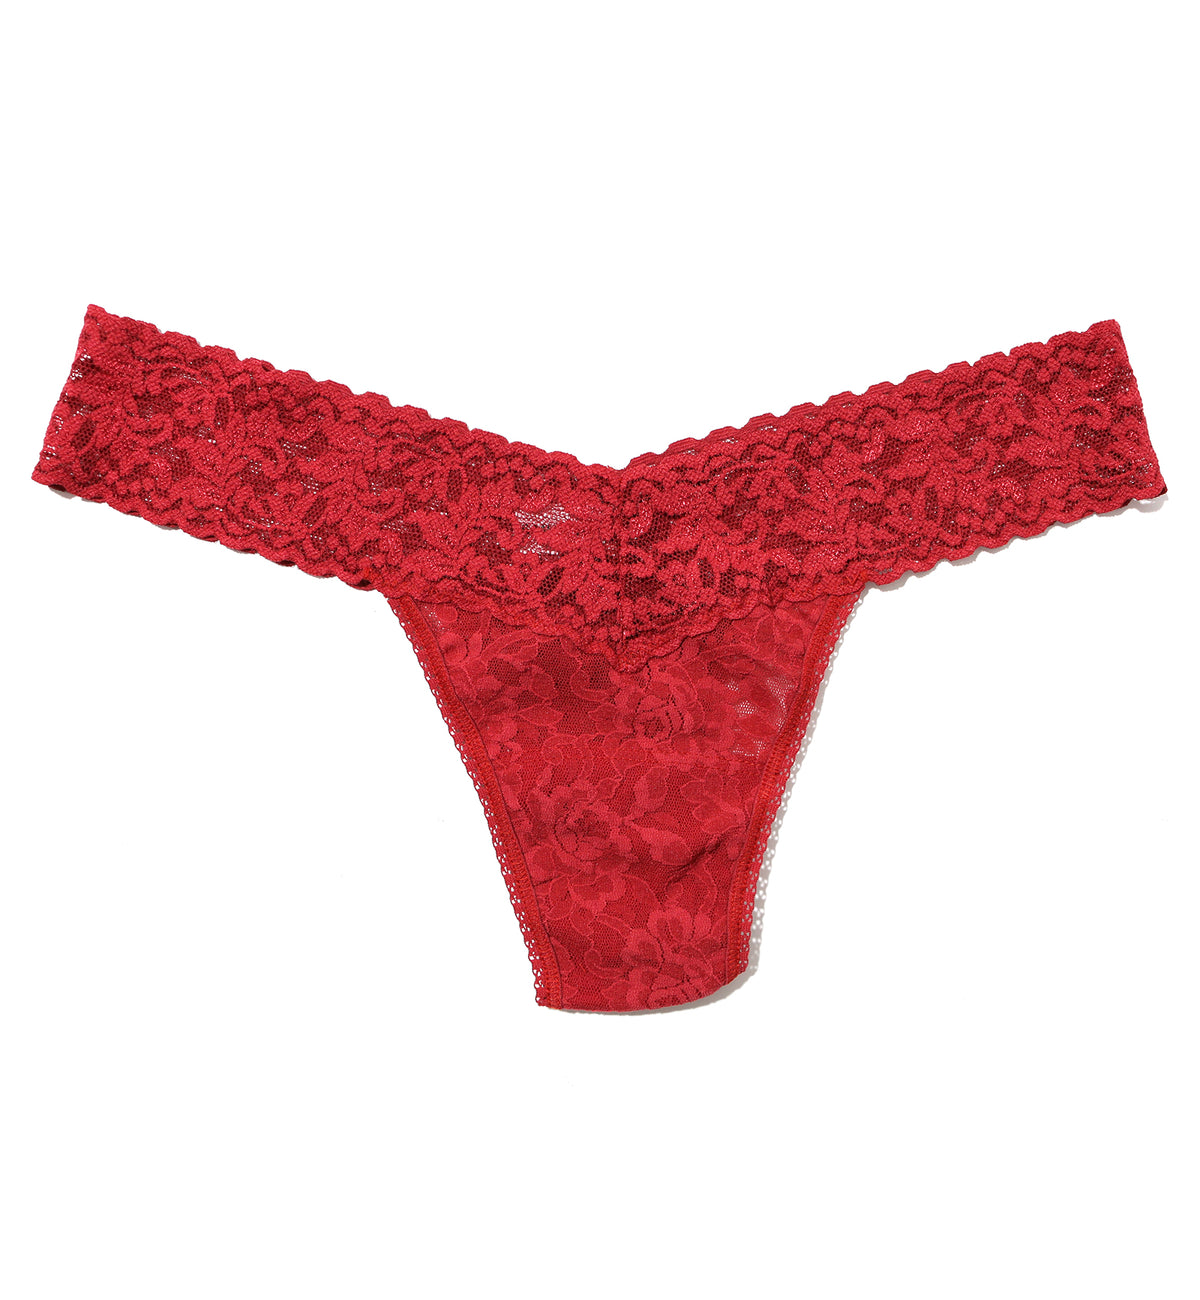 Hanky Panky Signature Lace Low Rise Thong (4911P),Burnt Sienna - Burnt Sienna,One Size